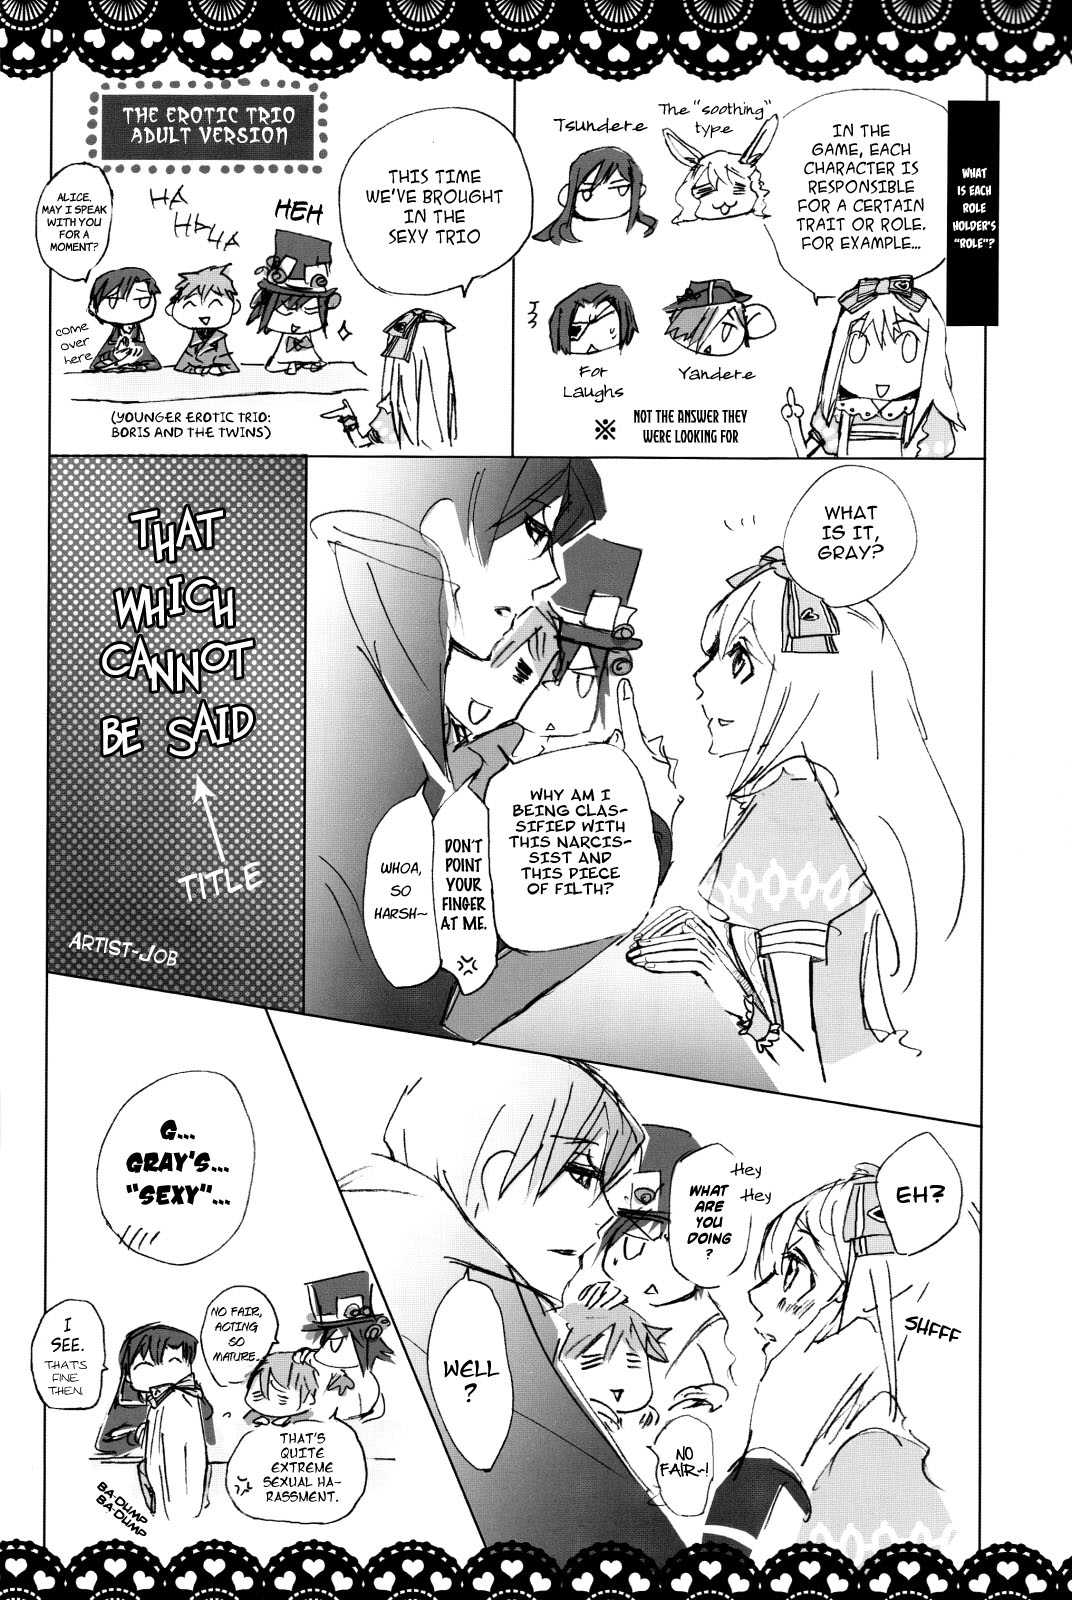 Joker No Kuni No Alice - Black X Gold (Anthology) Vol.1 Chapter 2: That Which Cannot Be Said (Job) - Picture 1